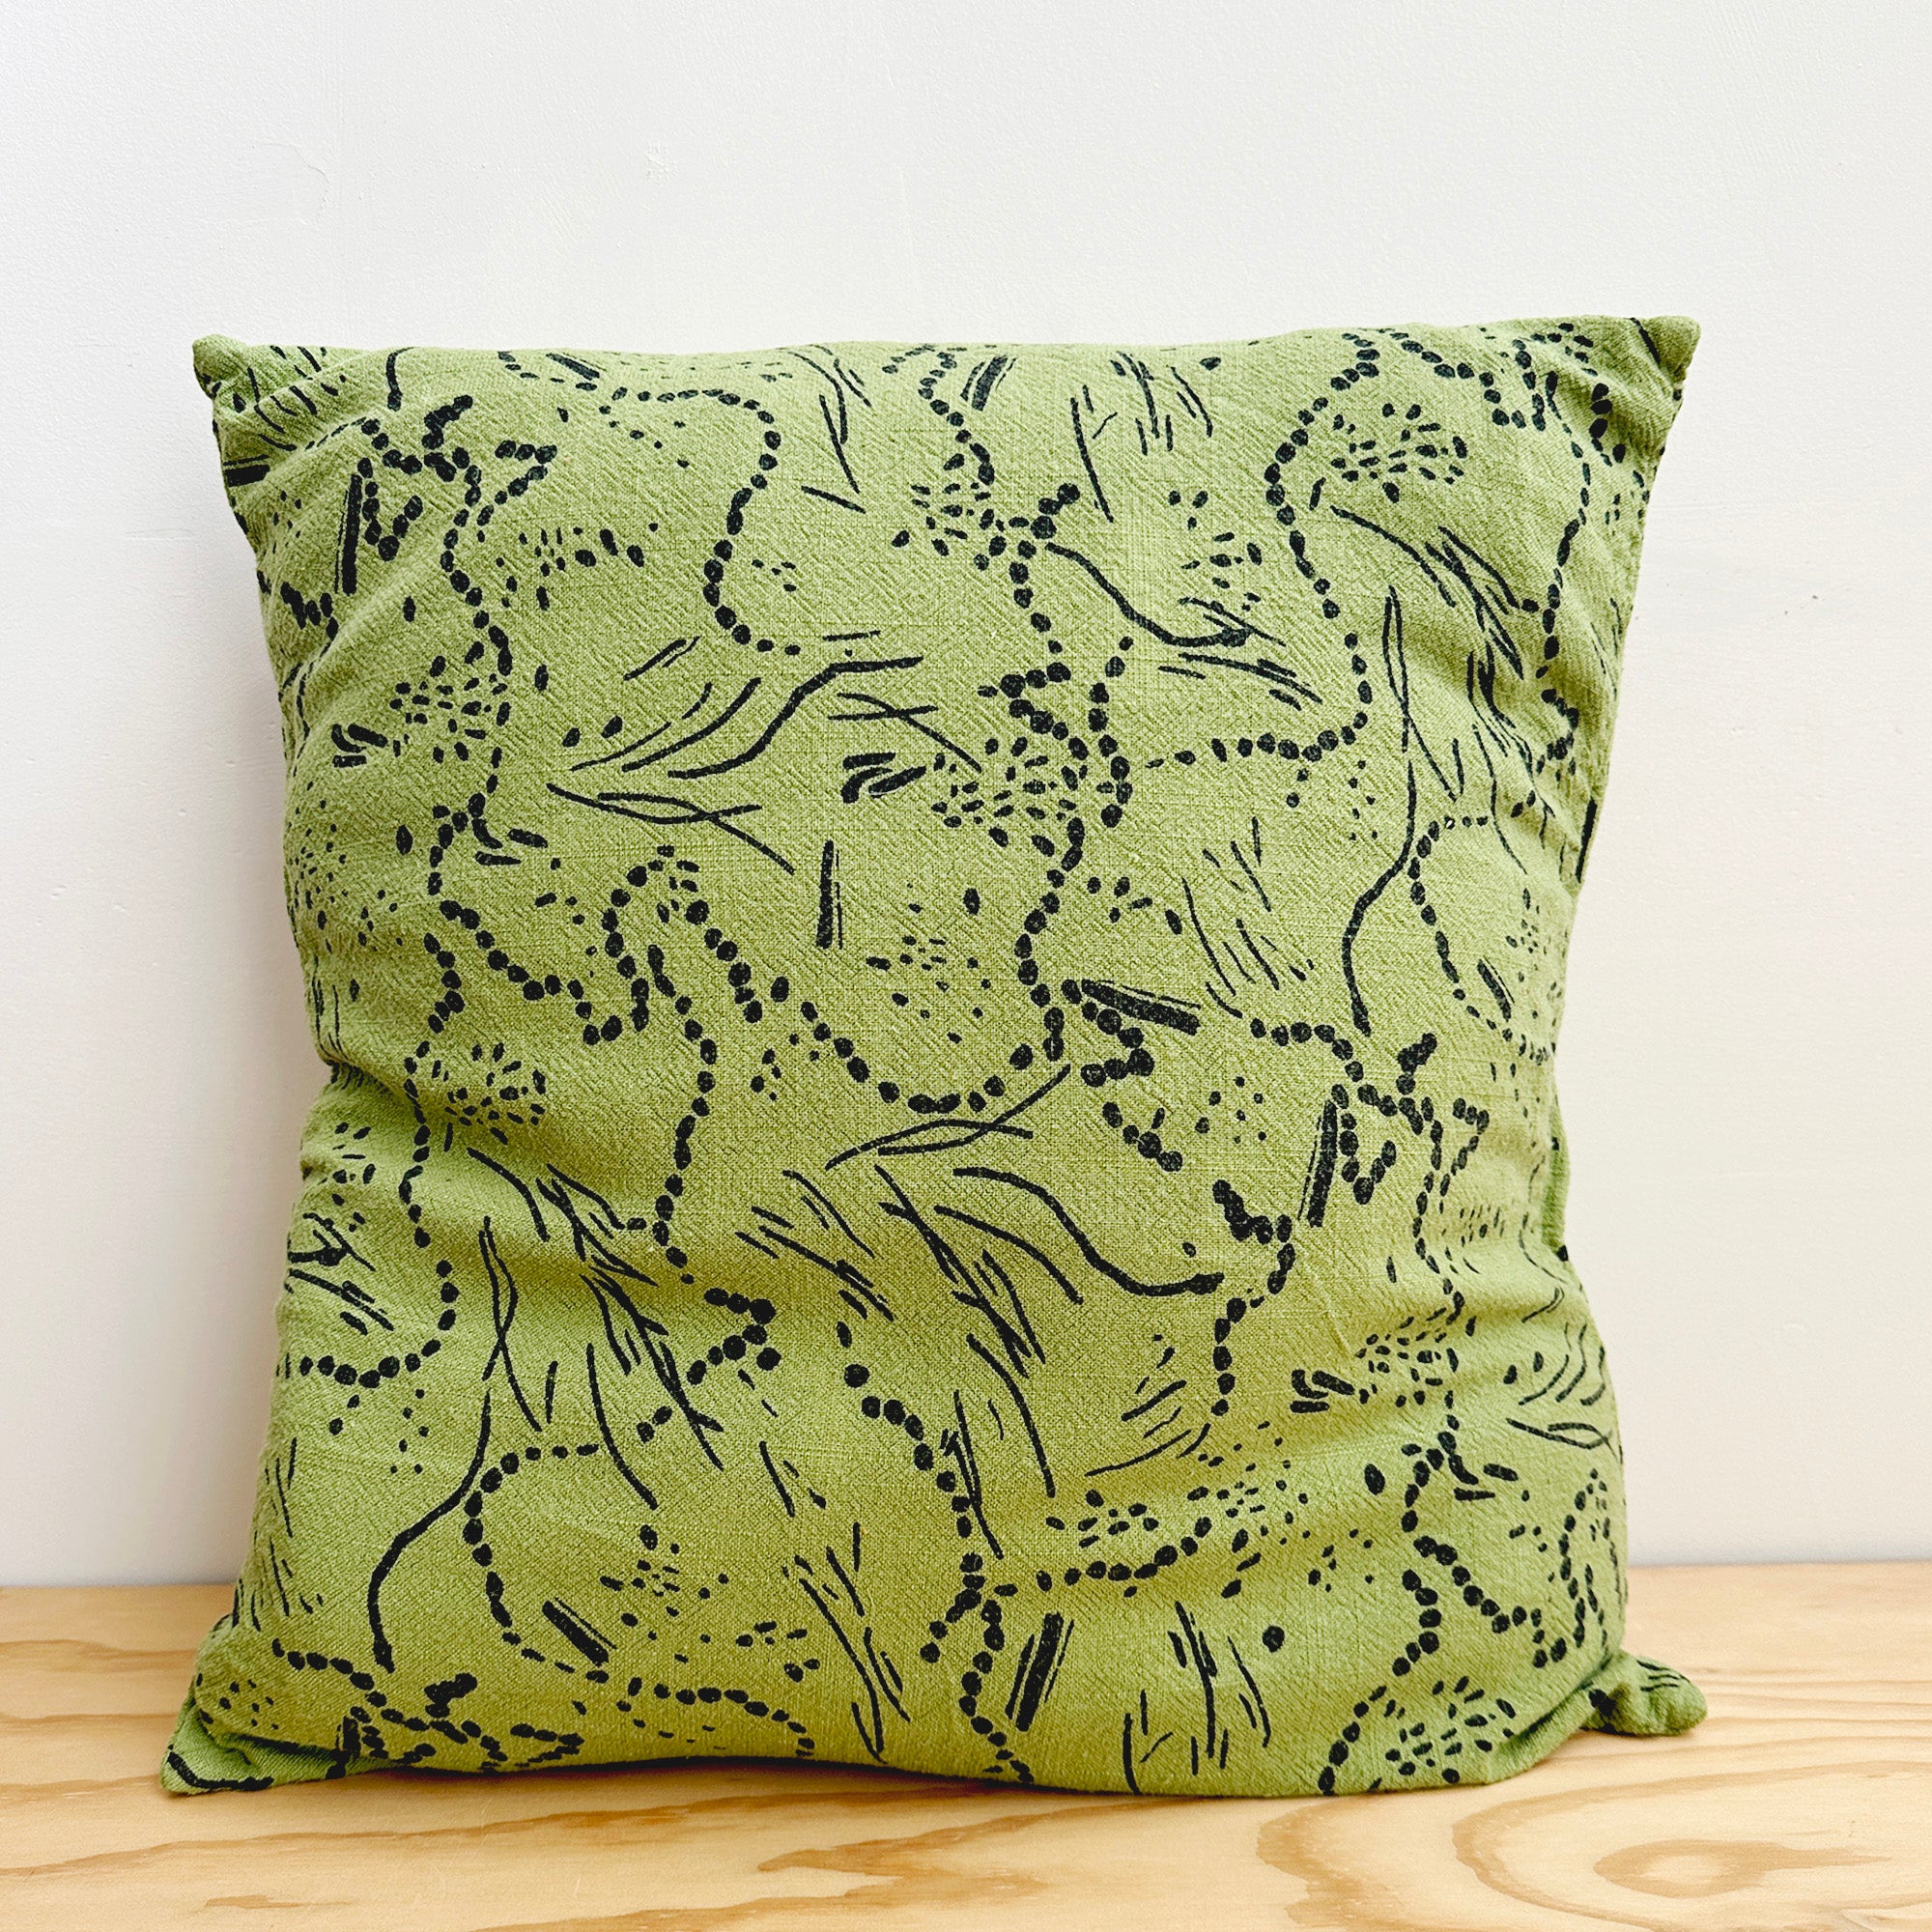 The Square Throw Pillow - Drape in Midnight and Moss